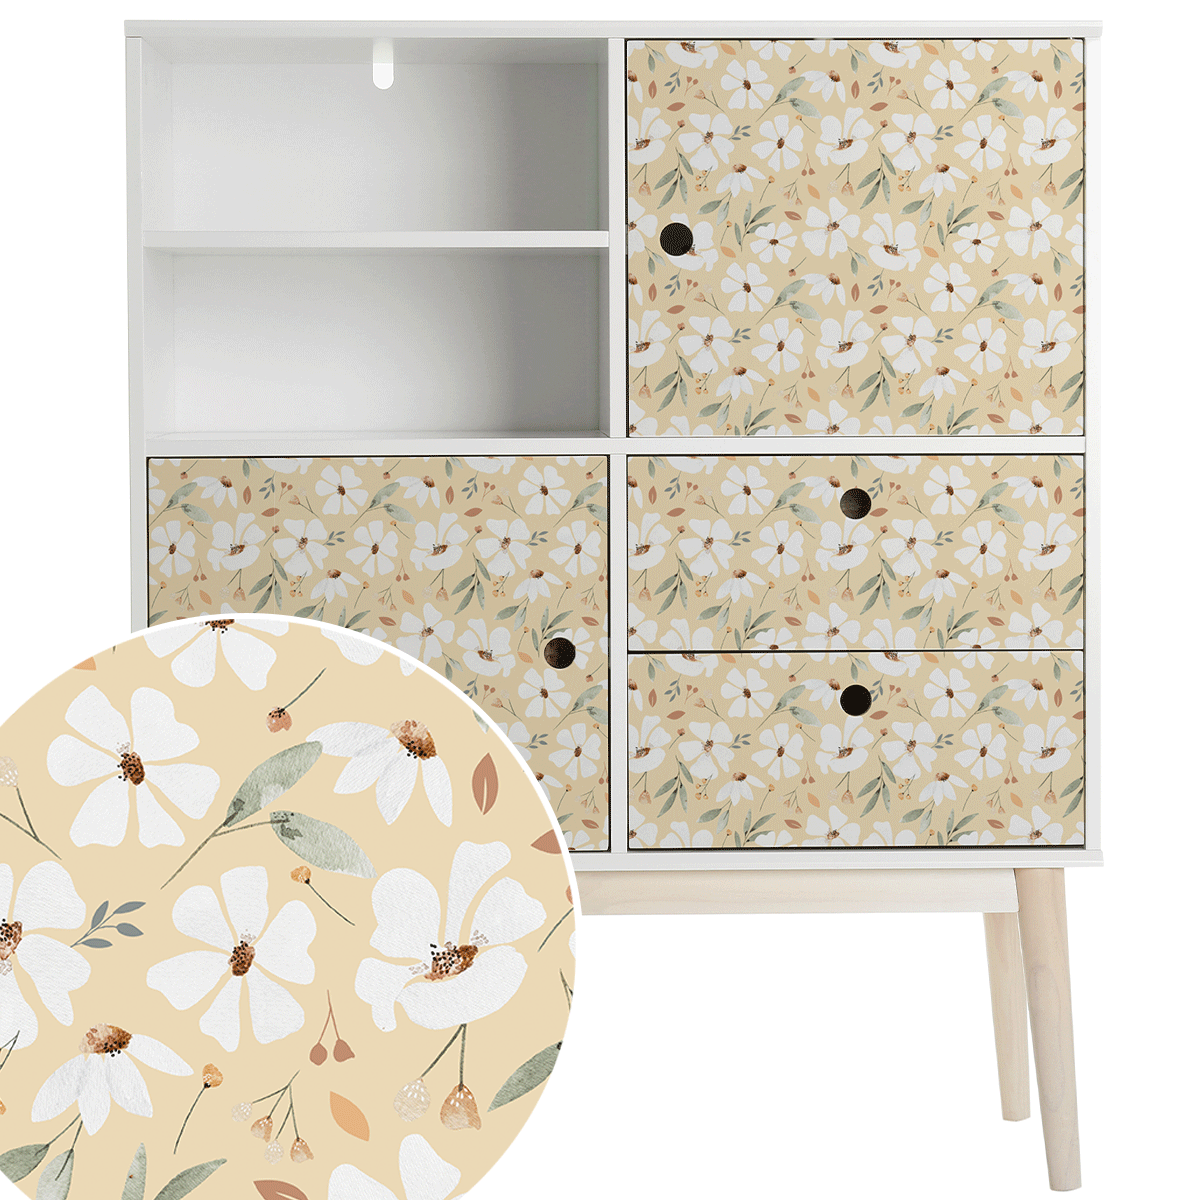 Furniture wrap - Sping flowers (cream)